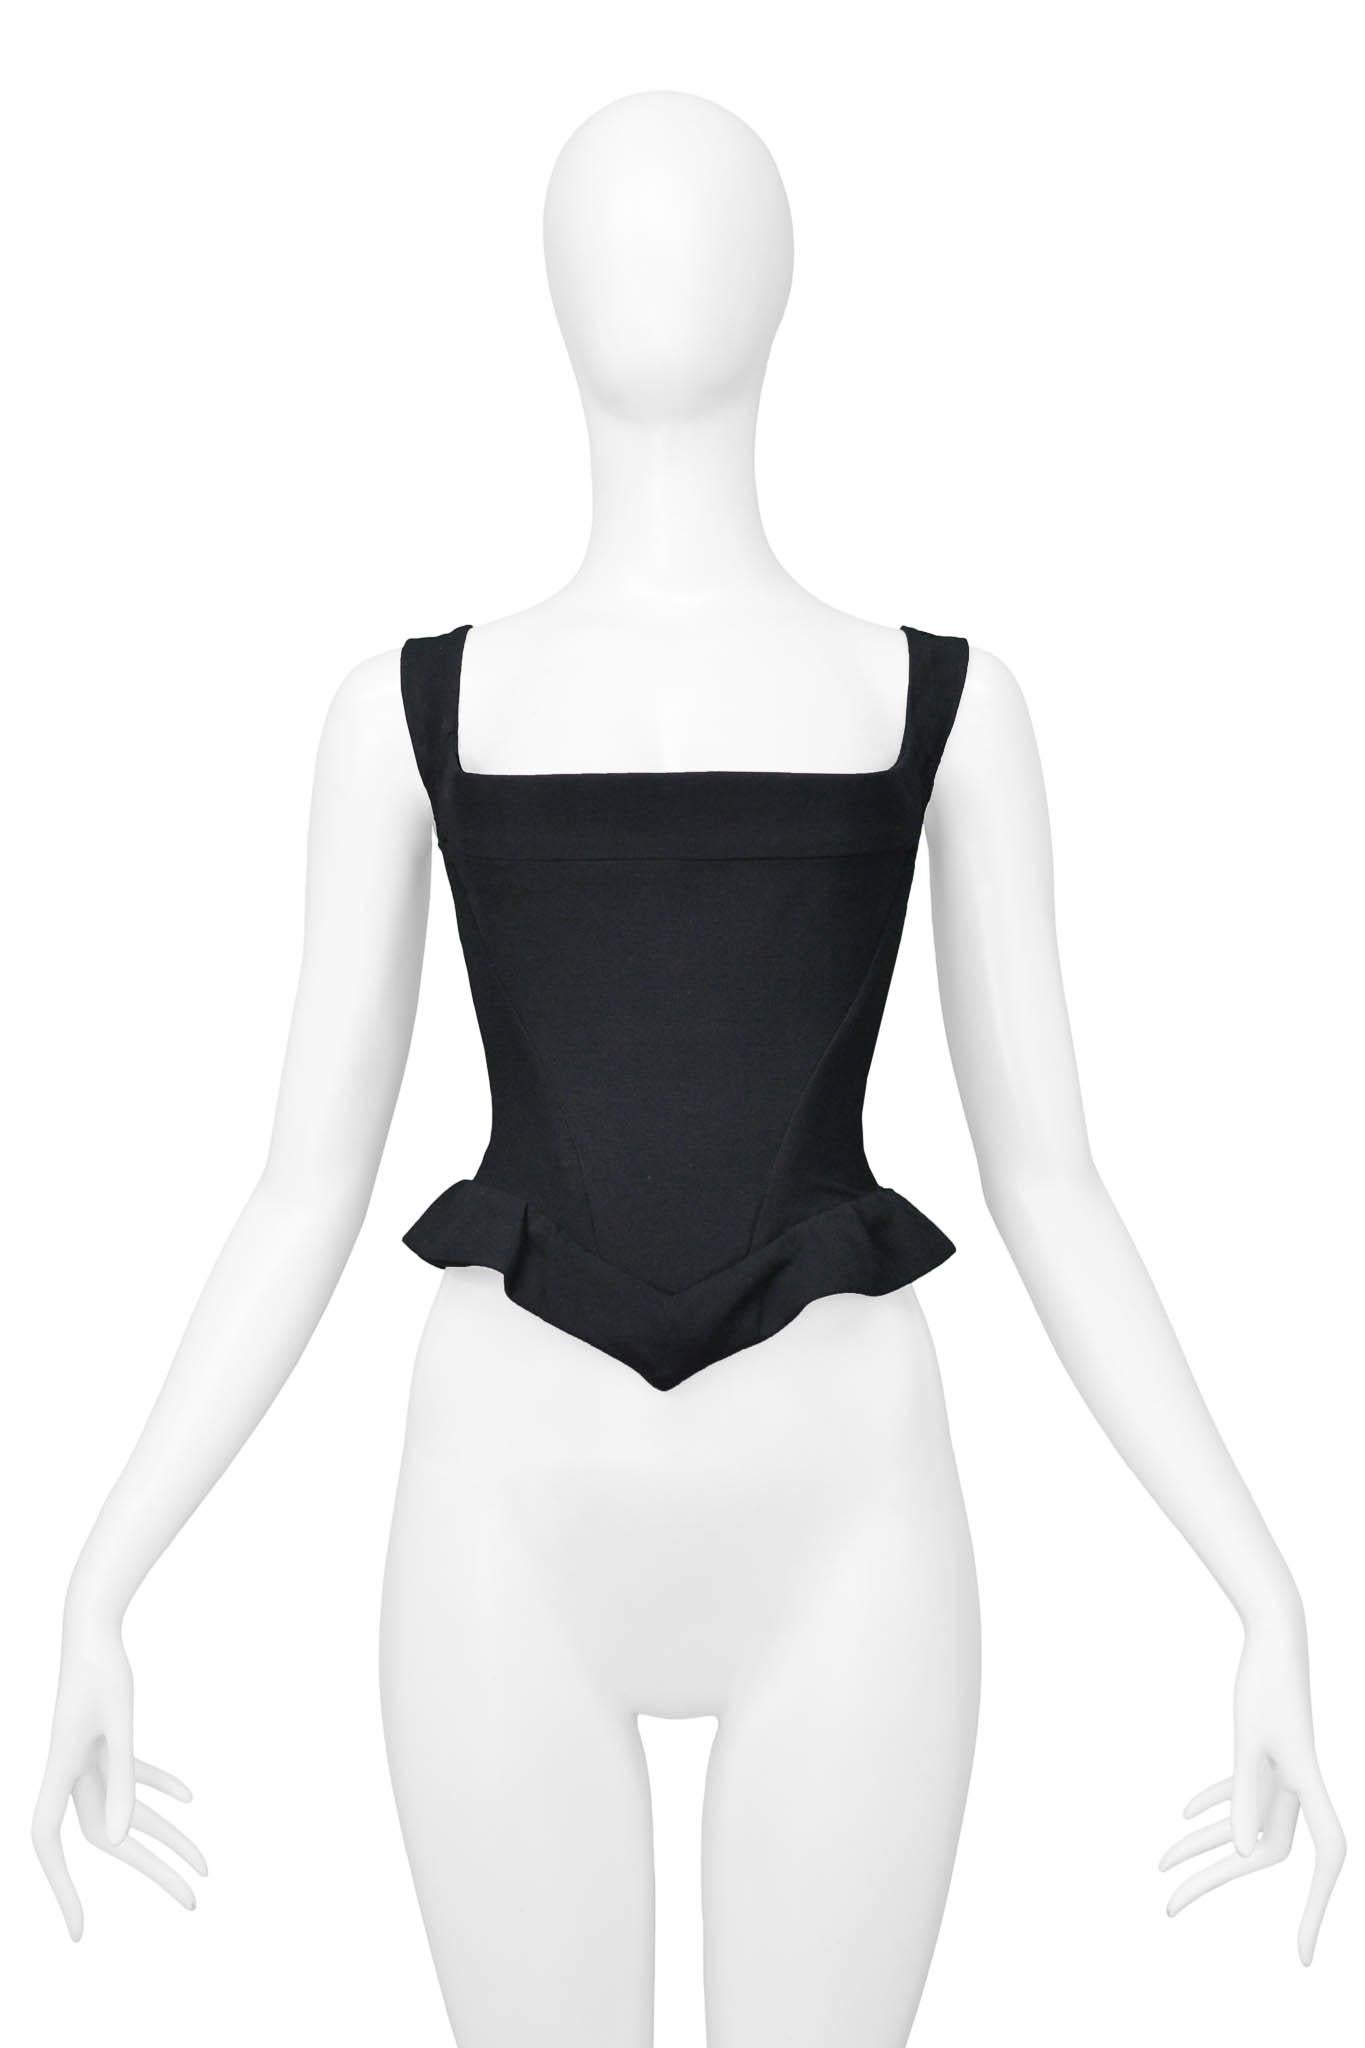 Resurrection Vintage is excited to present a vintage Vivienne Westwood black corset top featuring, inset boning for structure, a straight square neckline, a ruffle at the hem of the top, and a zipper down the back.

Vivienne Westwood
UK 12 or USA